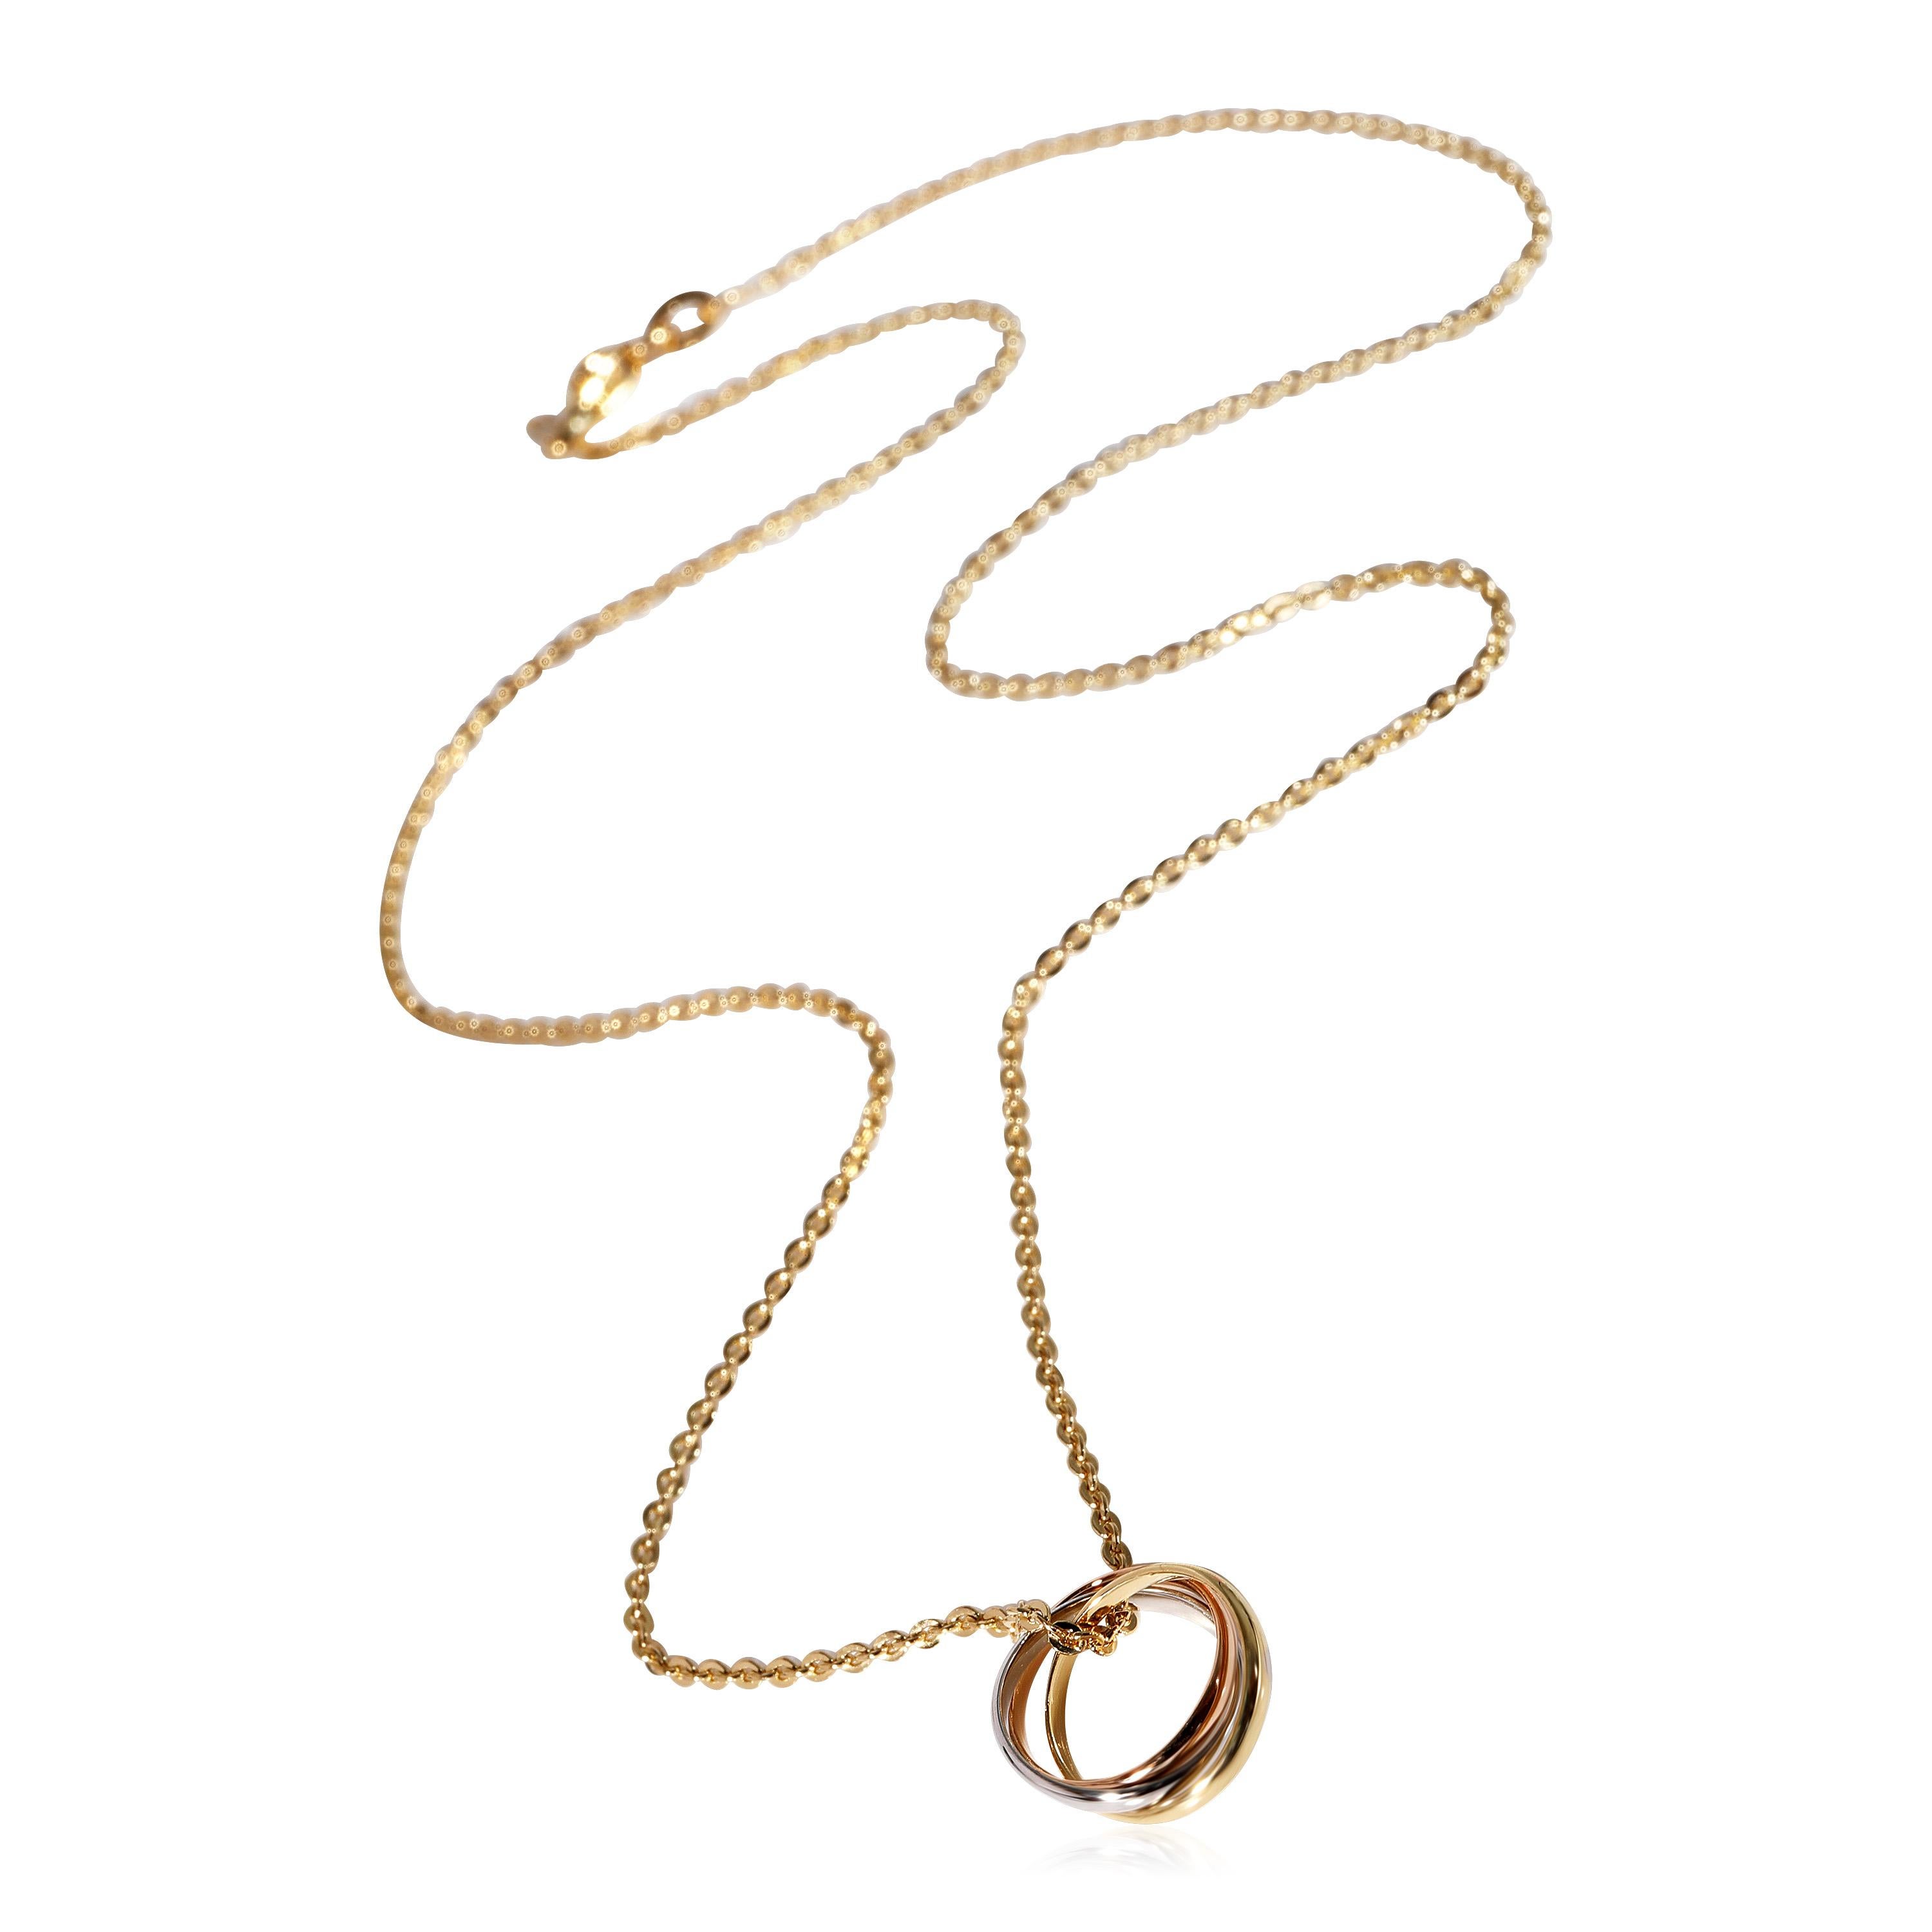 Cartier Trinity  Necklace in 18K 3 Tone Gold

PRIMARY DETAILS
SKU: 122345
Listing Title: Cartier Trinity  Necklace in 18K 3 Tone Gold
Condition Description: Retails for 1540 USD. In excellent condition and recently polished. Chain is 16 inches in